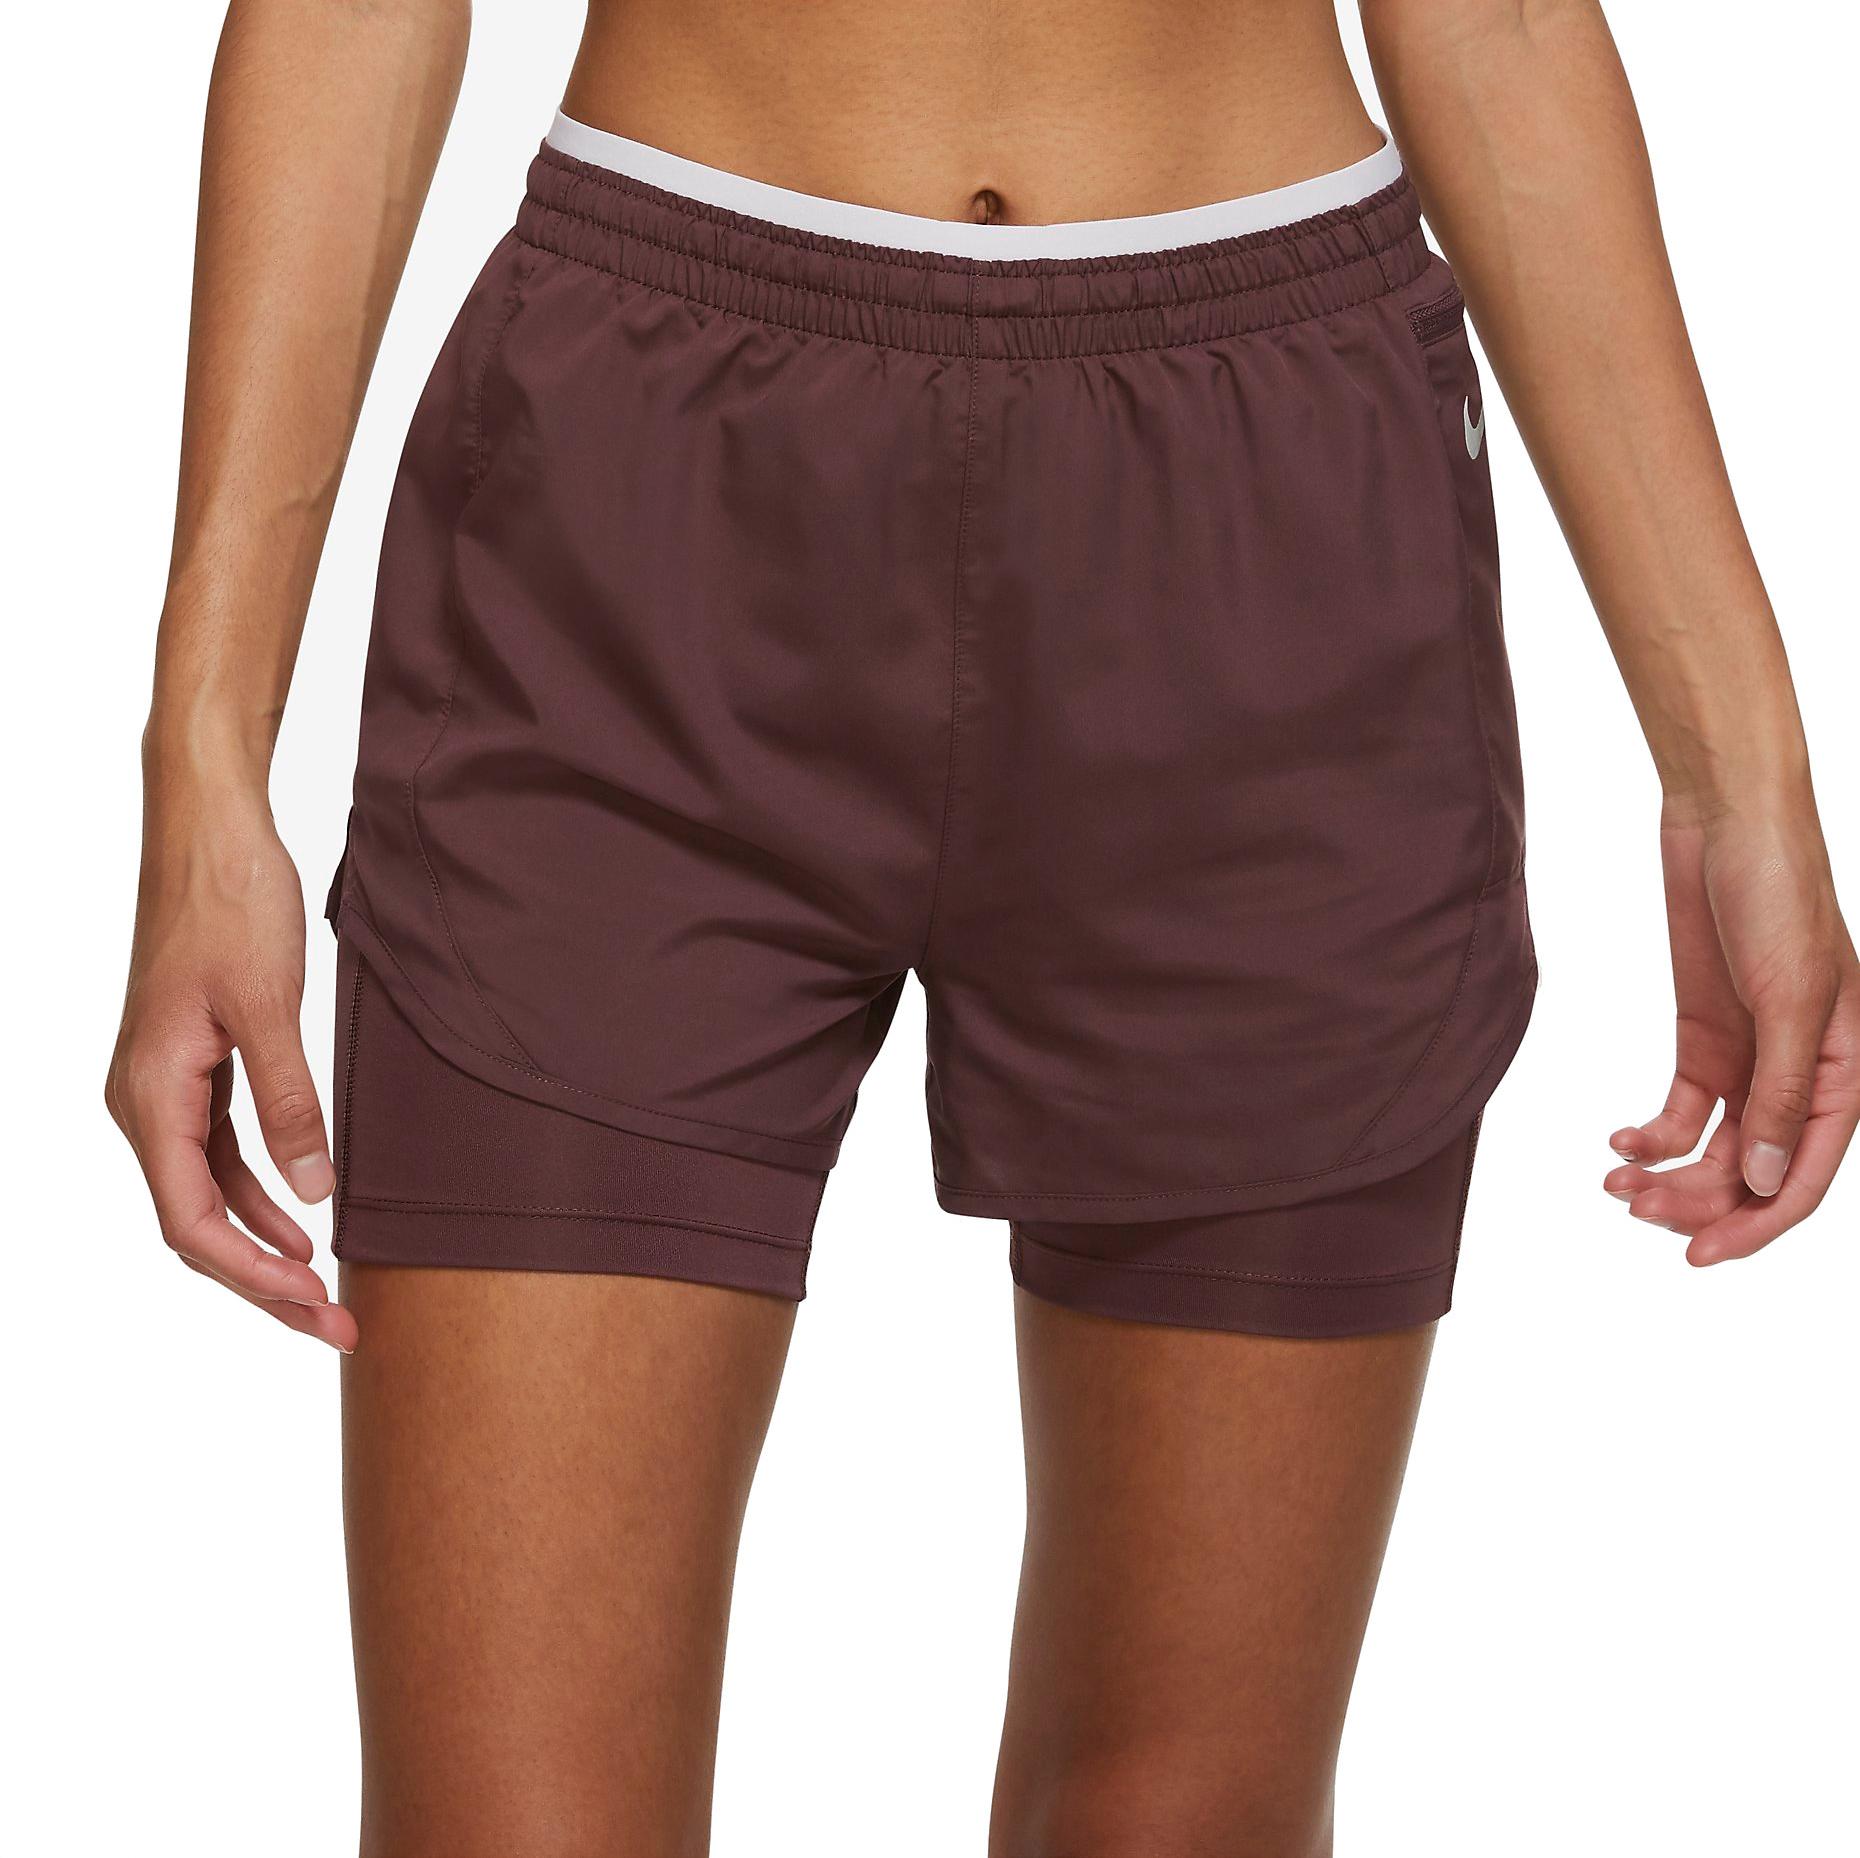 Nike Tempo Luxe Women's 2-In-1 Running Shorts. Nike BE